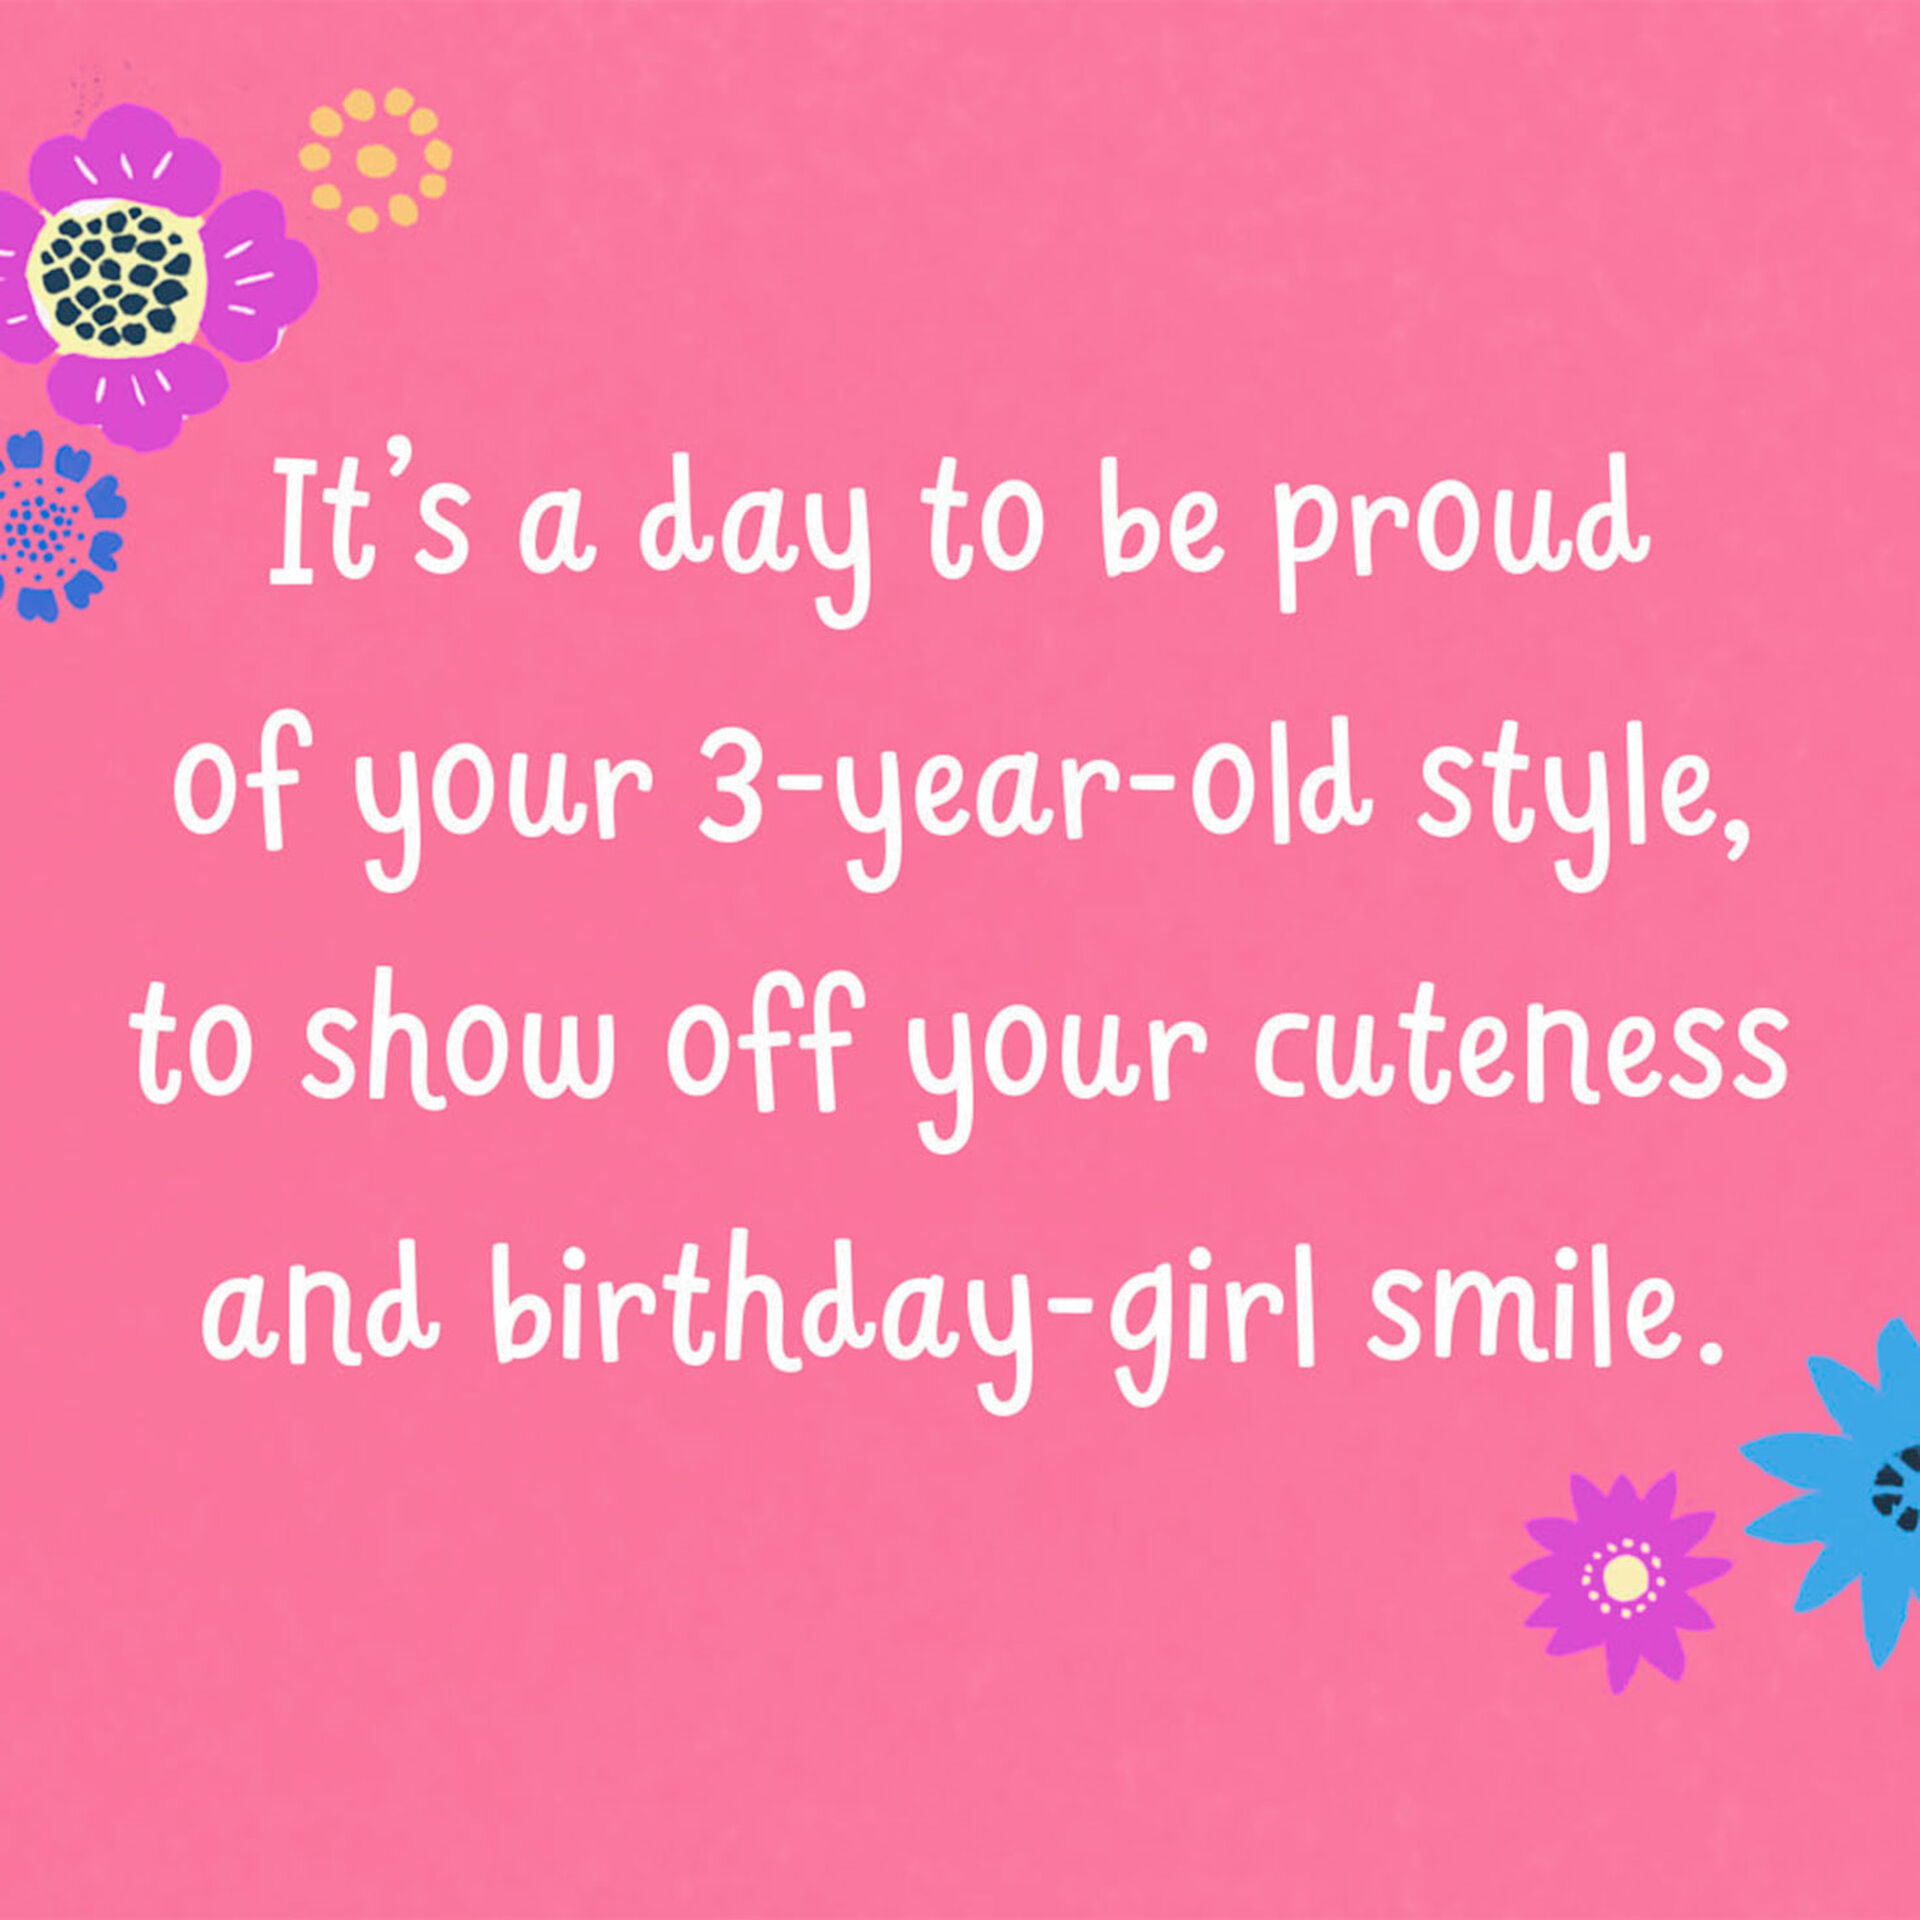 Cuteness-and-Smile-3rd-Birthday-Card_299HKB5946_02